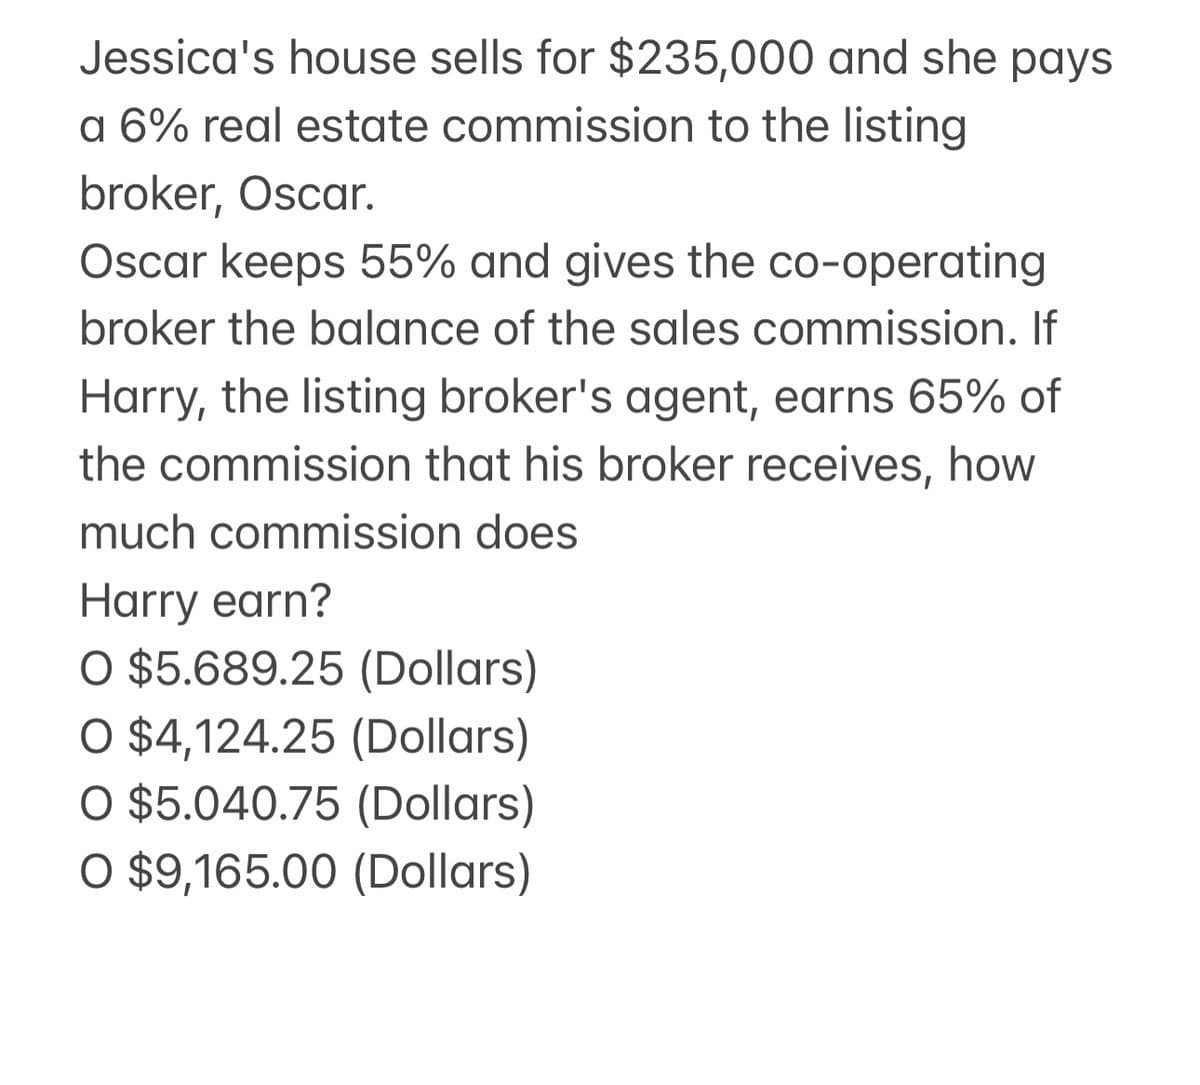 Jessica's house sells for $235,000 and she pays
a 6% real estate commission to the listing
broker, Oscar.
Oscar keeps 55% and gives the co-operating
broker the balance of the sales commission. If
Harry, the listing broker's agent, earns 65% of
the commission that his broker receives, how
much commission does
Harry earn?
O $5.689.25 (Dollars)
O $4,124.25 (Dollars)
O $5.040.75 (Dollars)
O $9,165.00 (Dollars)